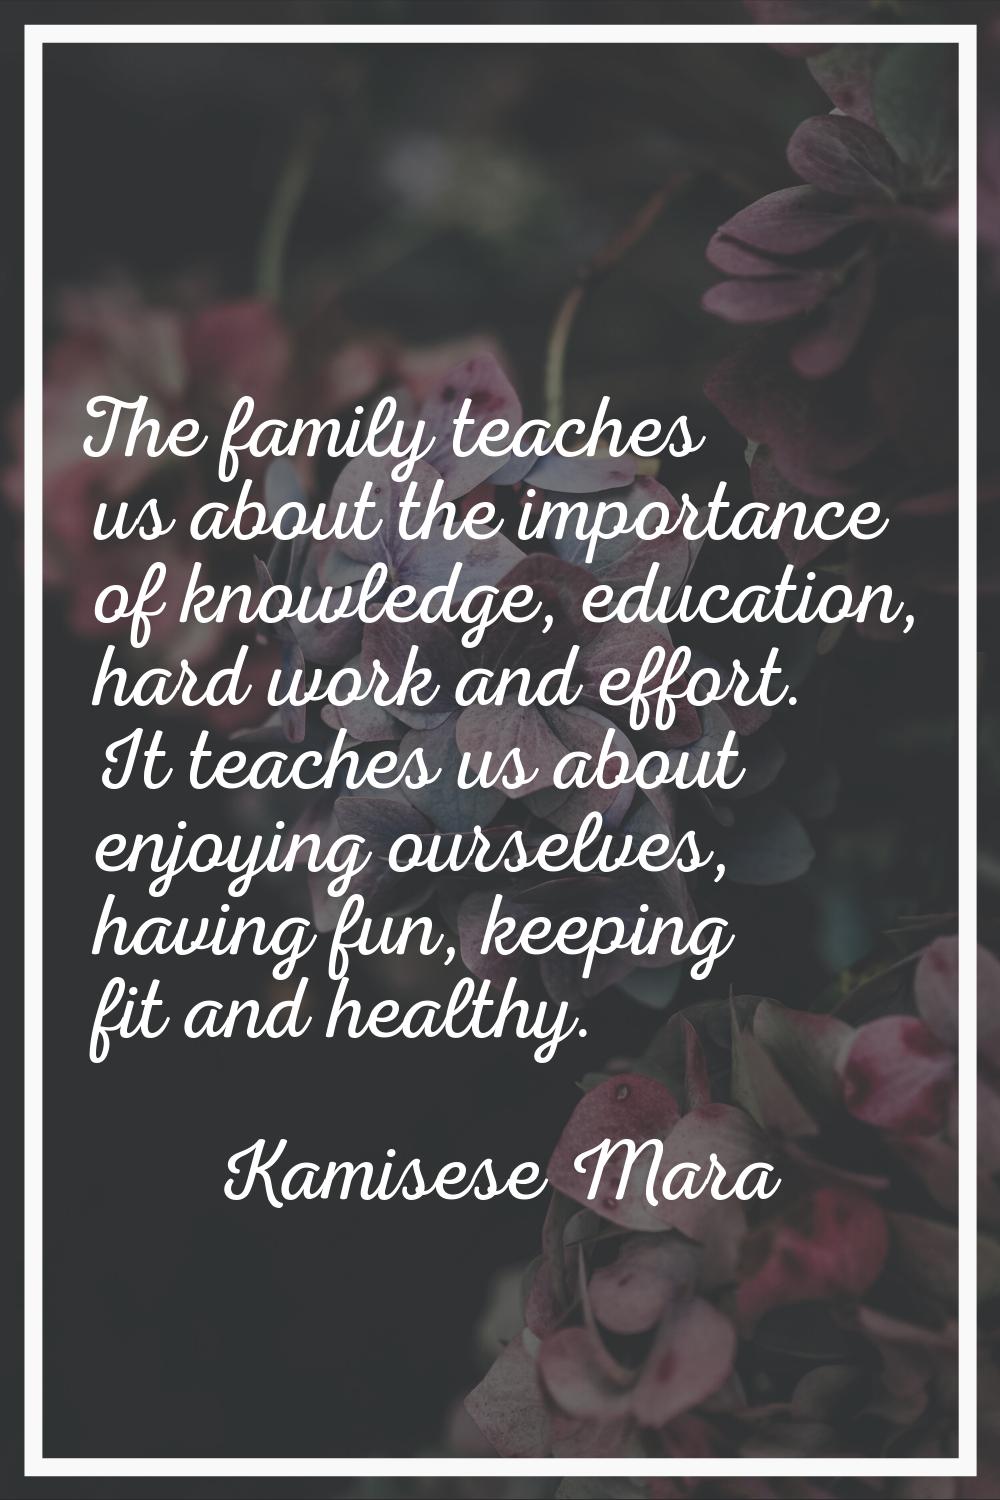 The family teaches us about the importance of knowledge, education, hard work and effort. It teache